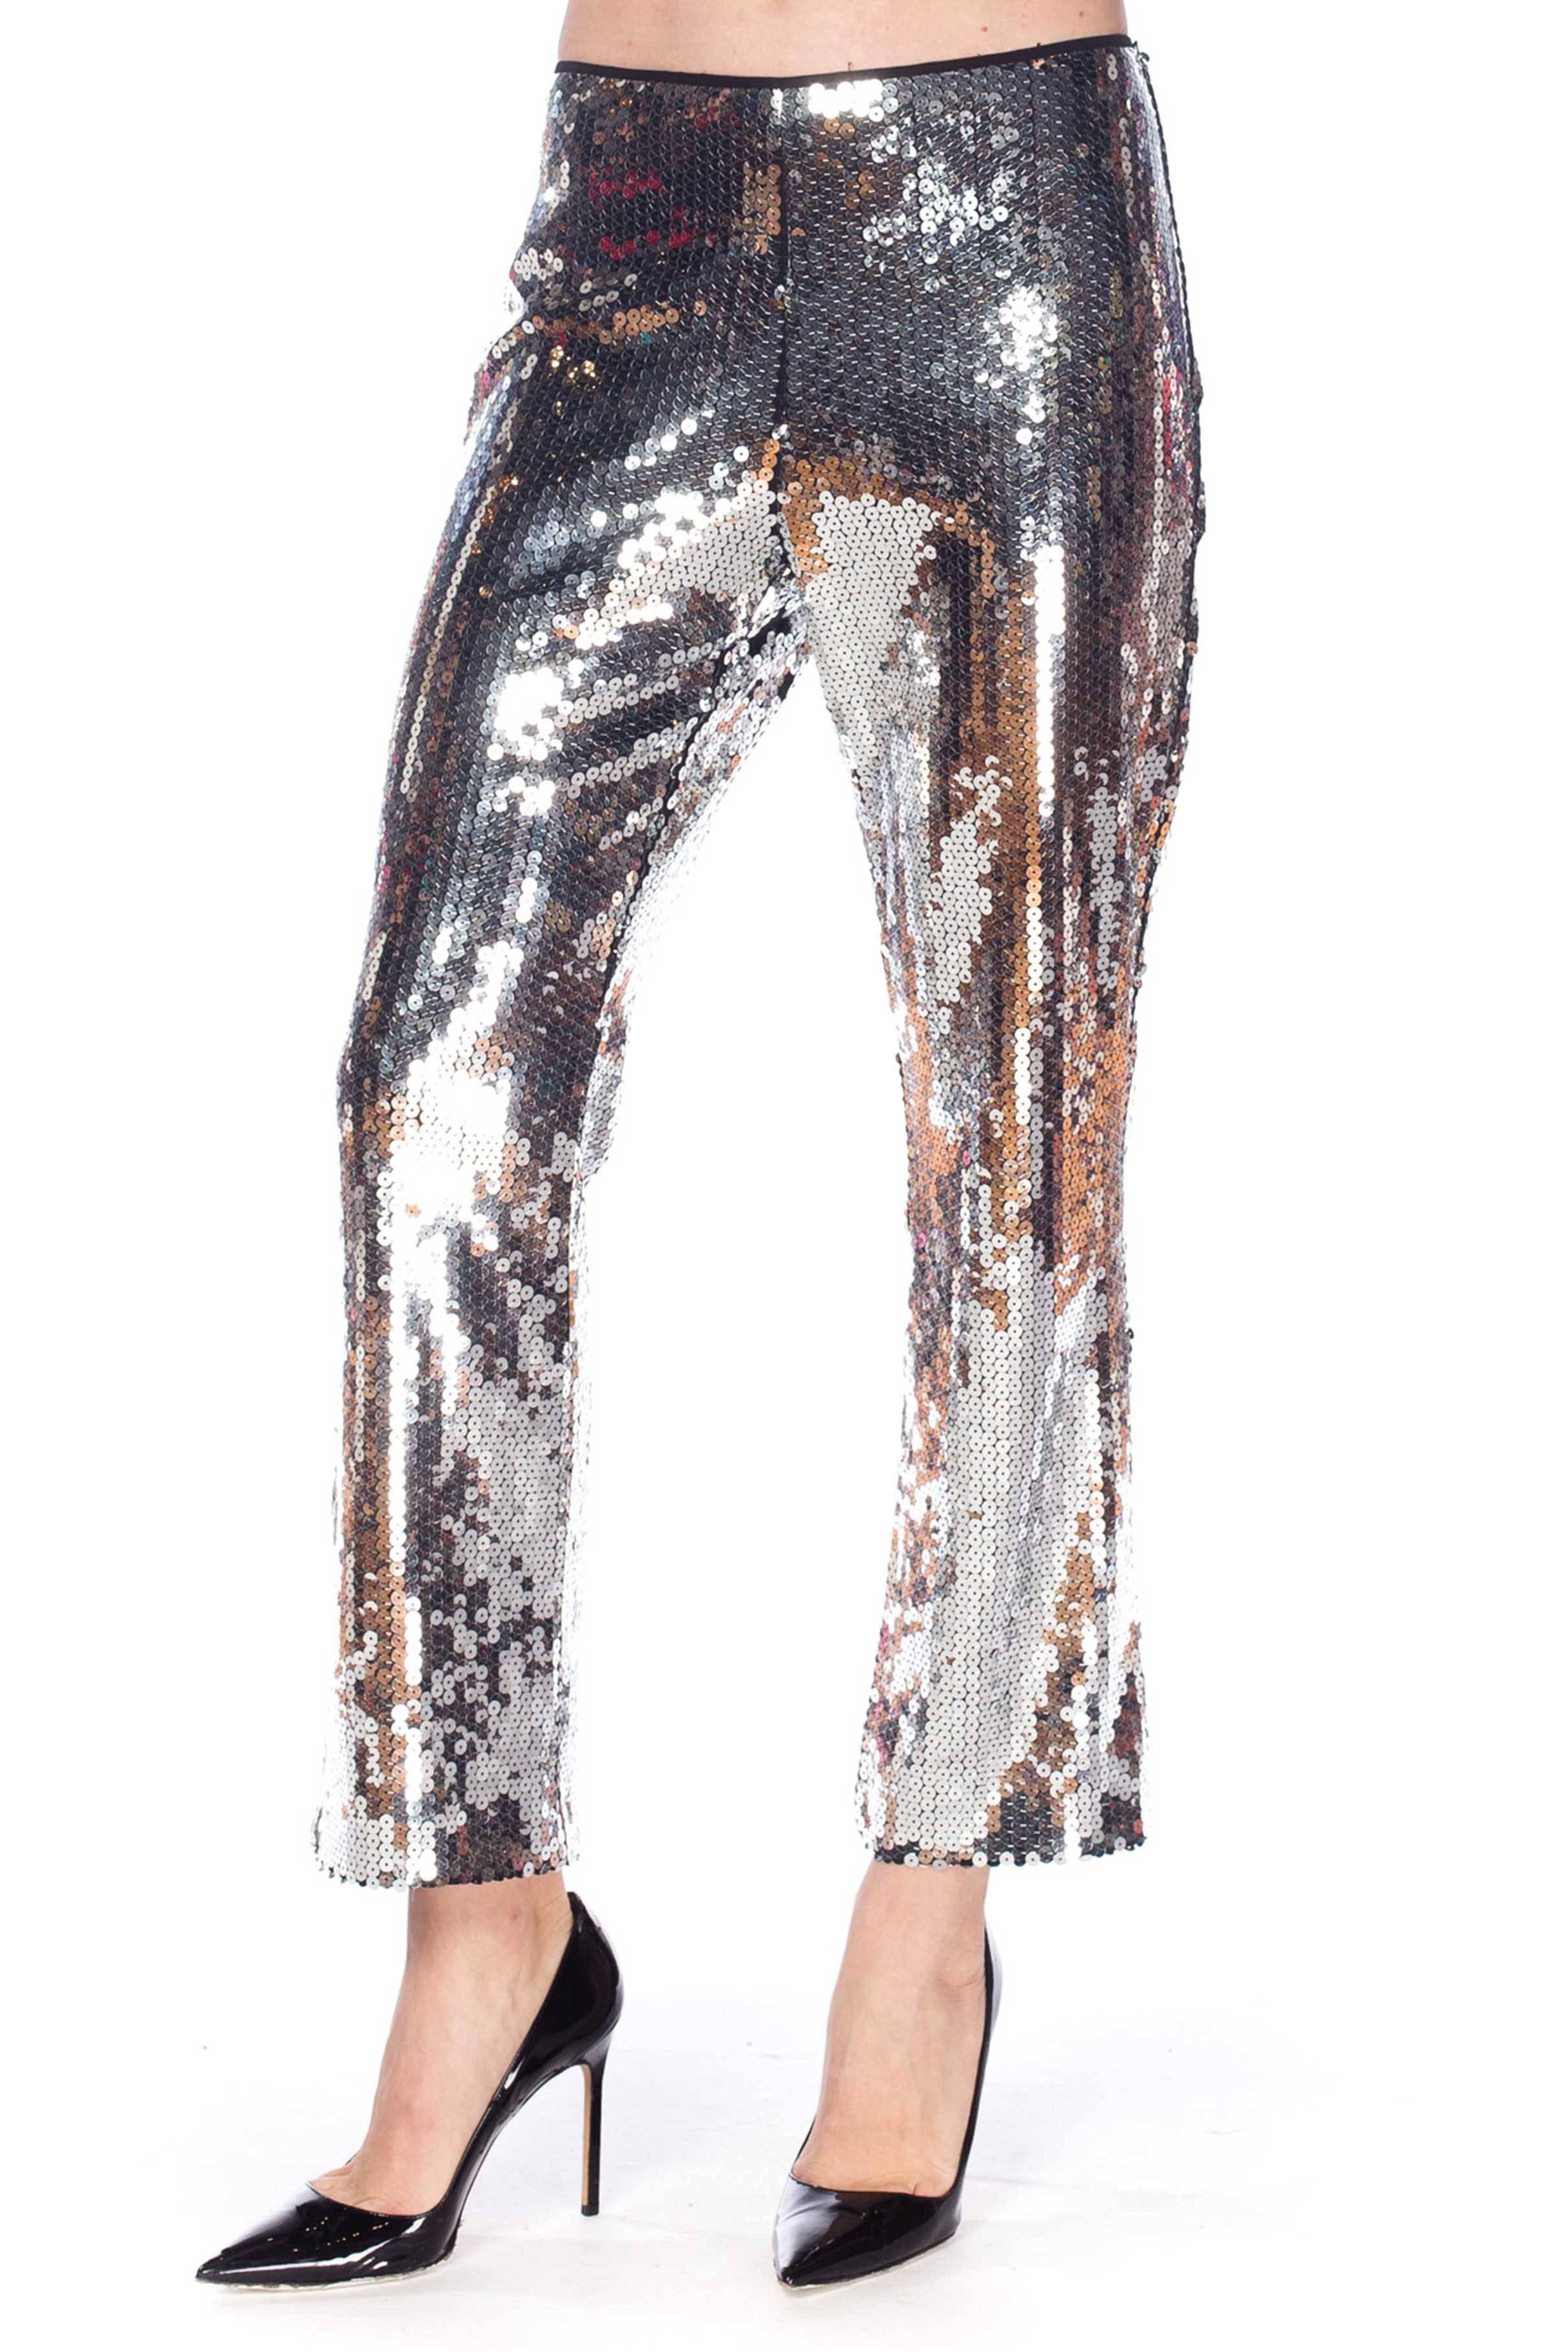 Dolce & Gabbana Silver Metallic Sequined Low-Rise Pants 5